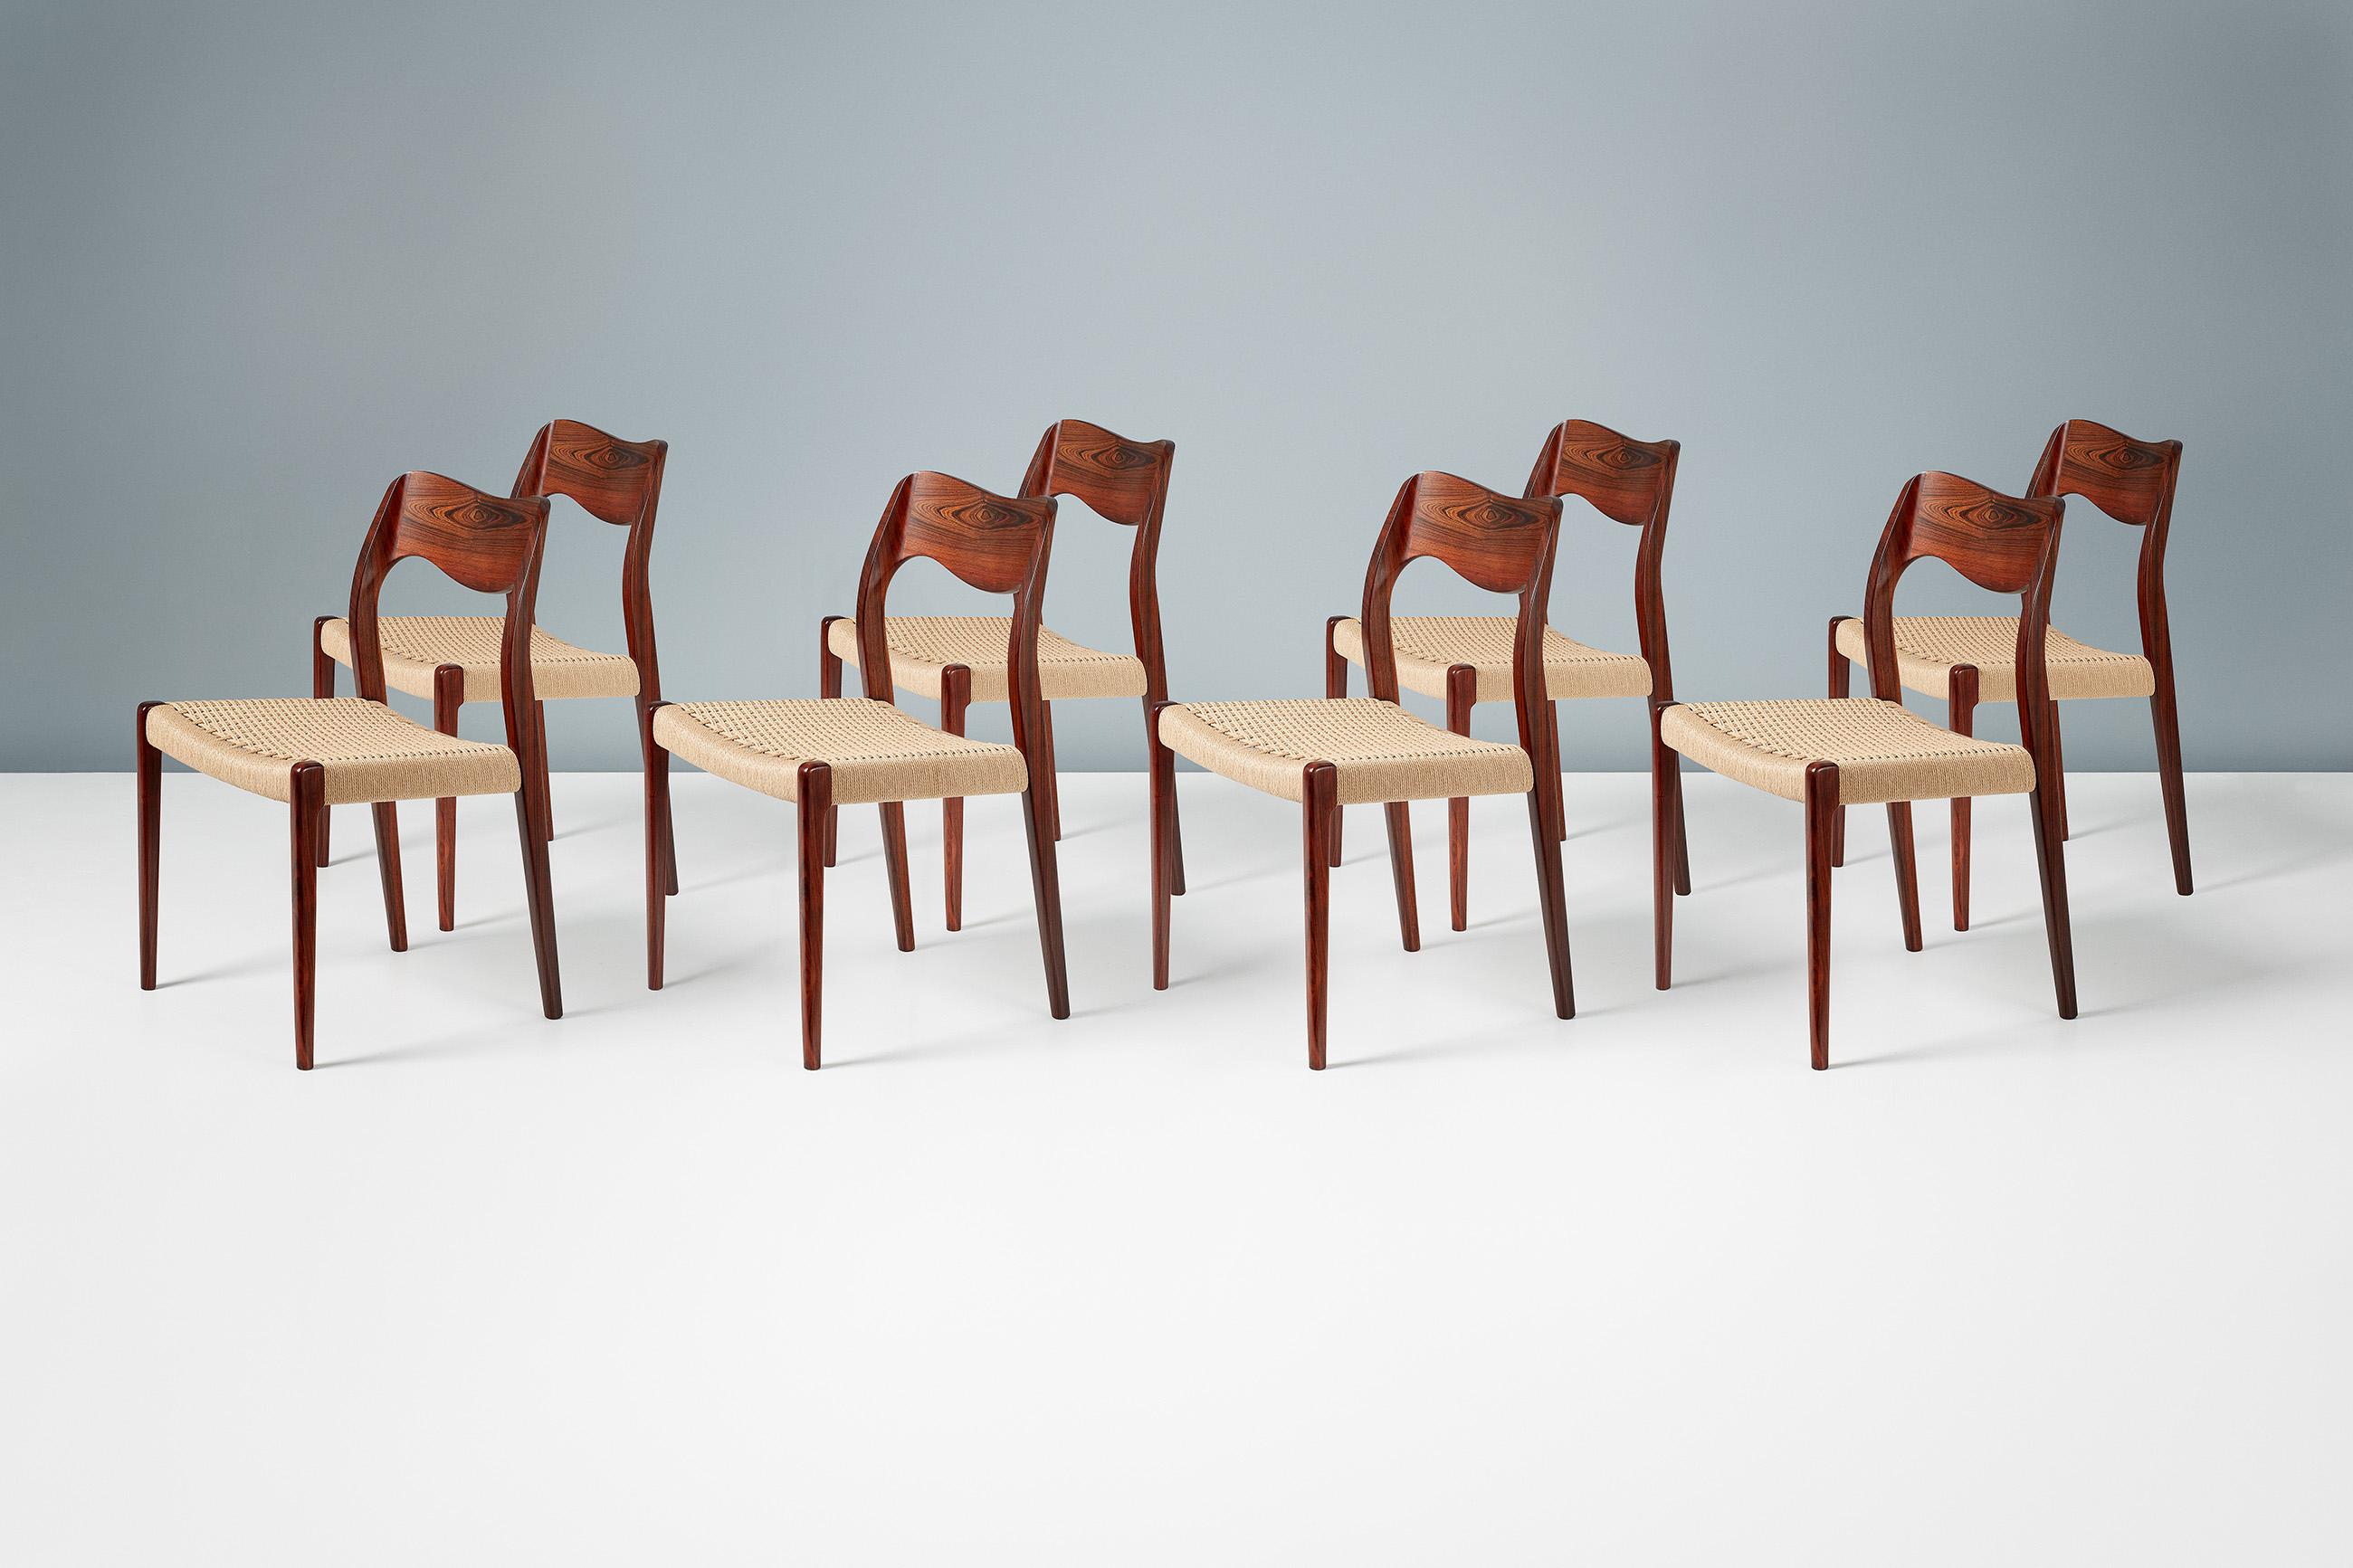 Niels O. Møller

Model 71 dining chairs, 1951

Set of 8 rosewood dining chairs designed by Niels O. Moller for his own company J.L. Moller Mobelfabrik, Denmark. The Model 71 was one of Moller’s first designs and remains an all time Danish